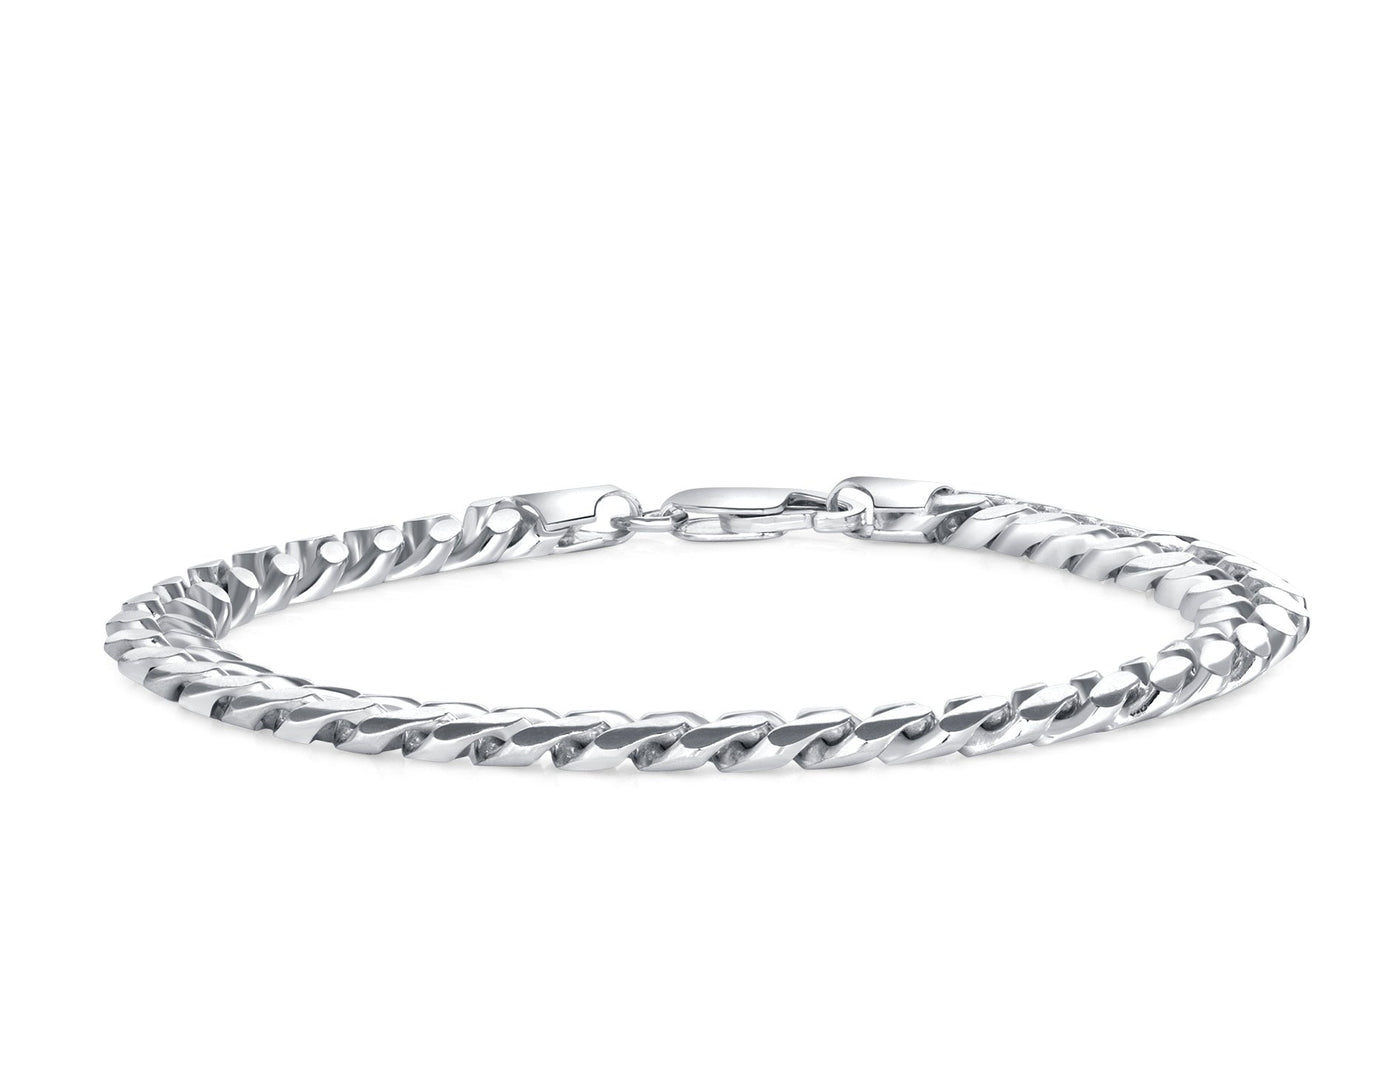 Italian Sterling Silver 7mm Miami Cuban Curb Link Chain Necklace Bracelet, 7"- 26"